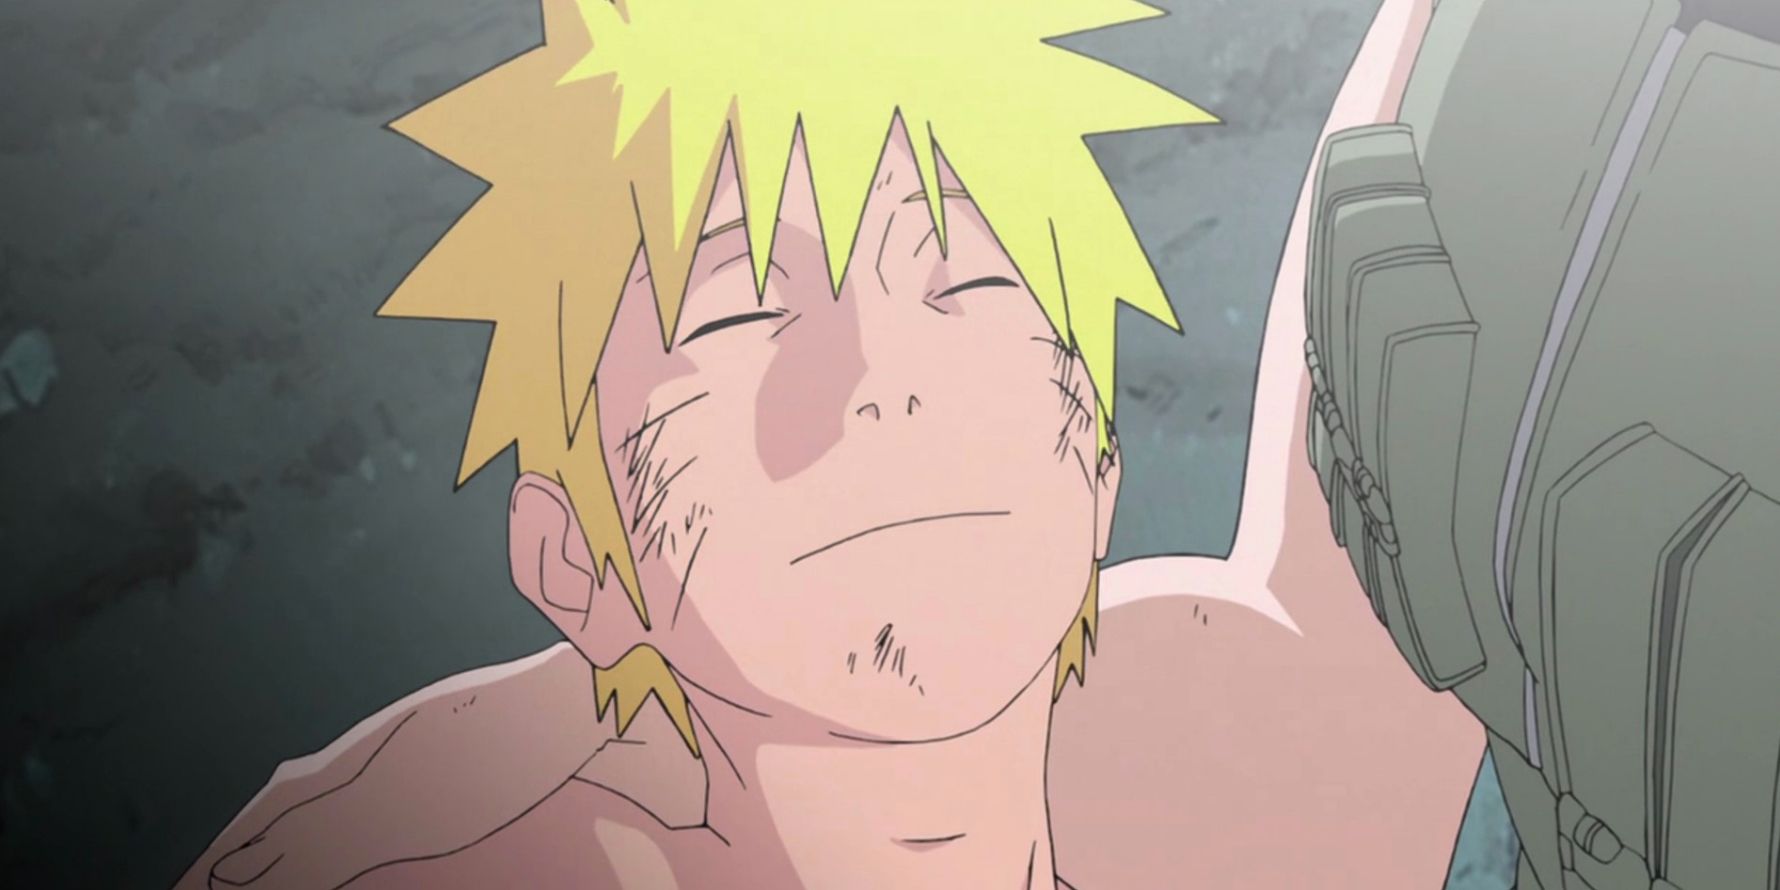 Menma Namikaze is held up unconscious in Naruto Shippuden